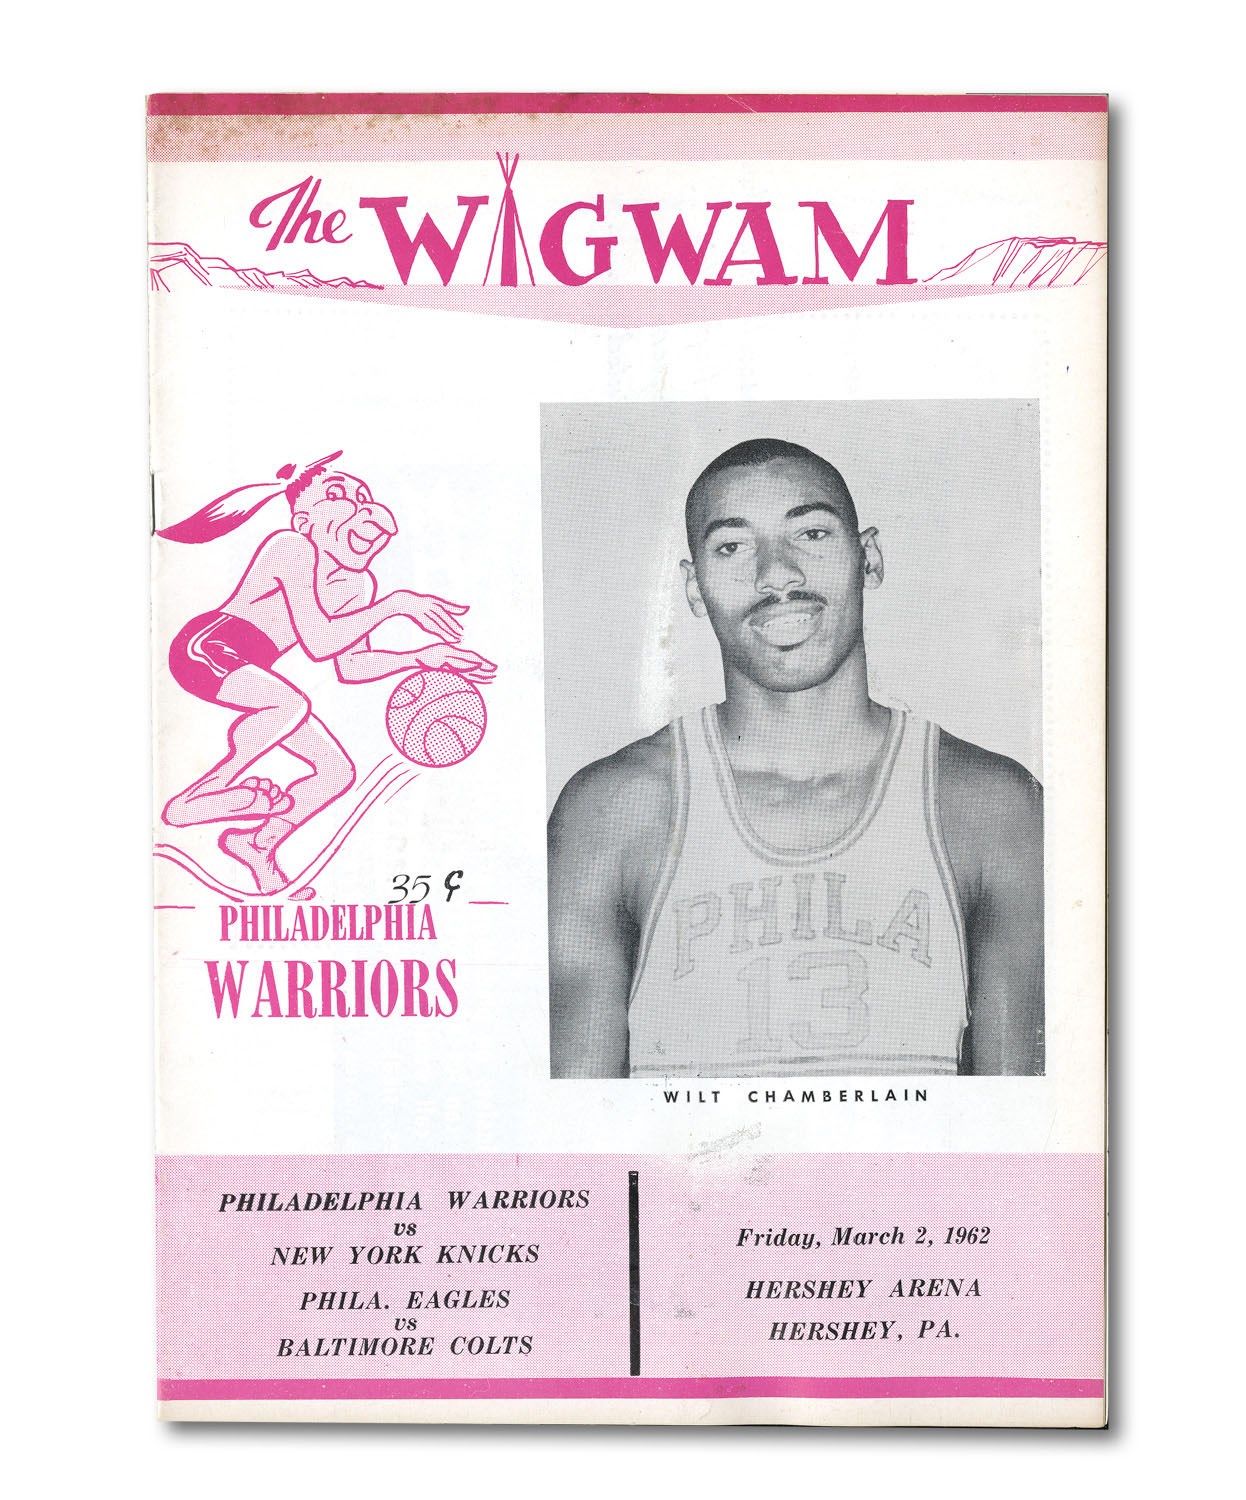 Lot # 608: Historic and Scarce 1962 Wilt Chamberlain 100-Point Game Program  at Hershey, PA!